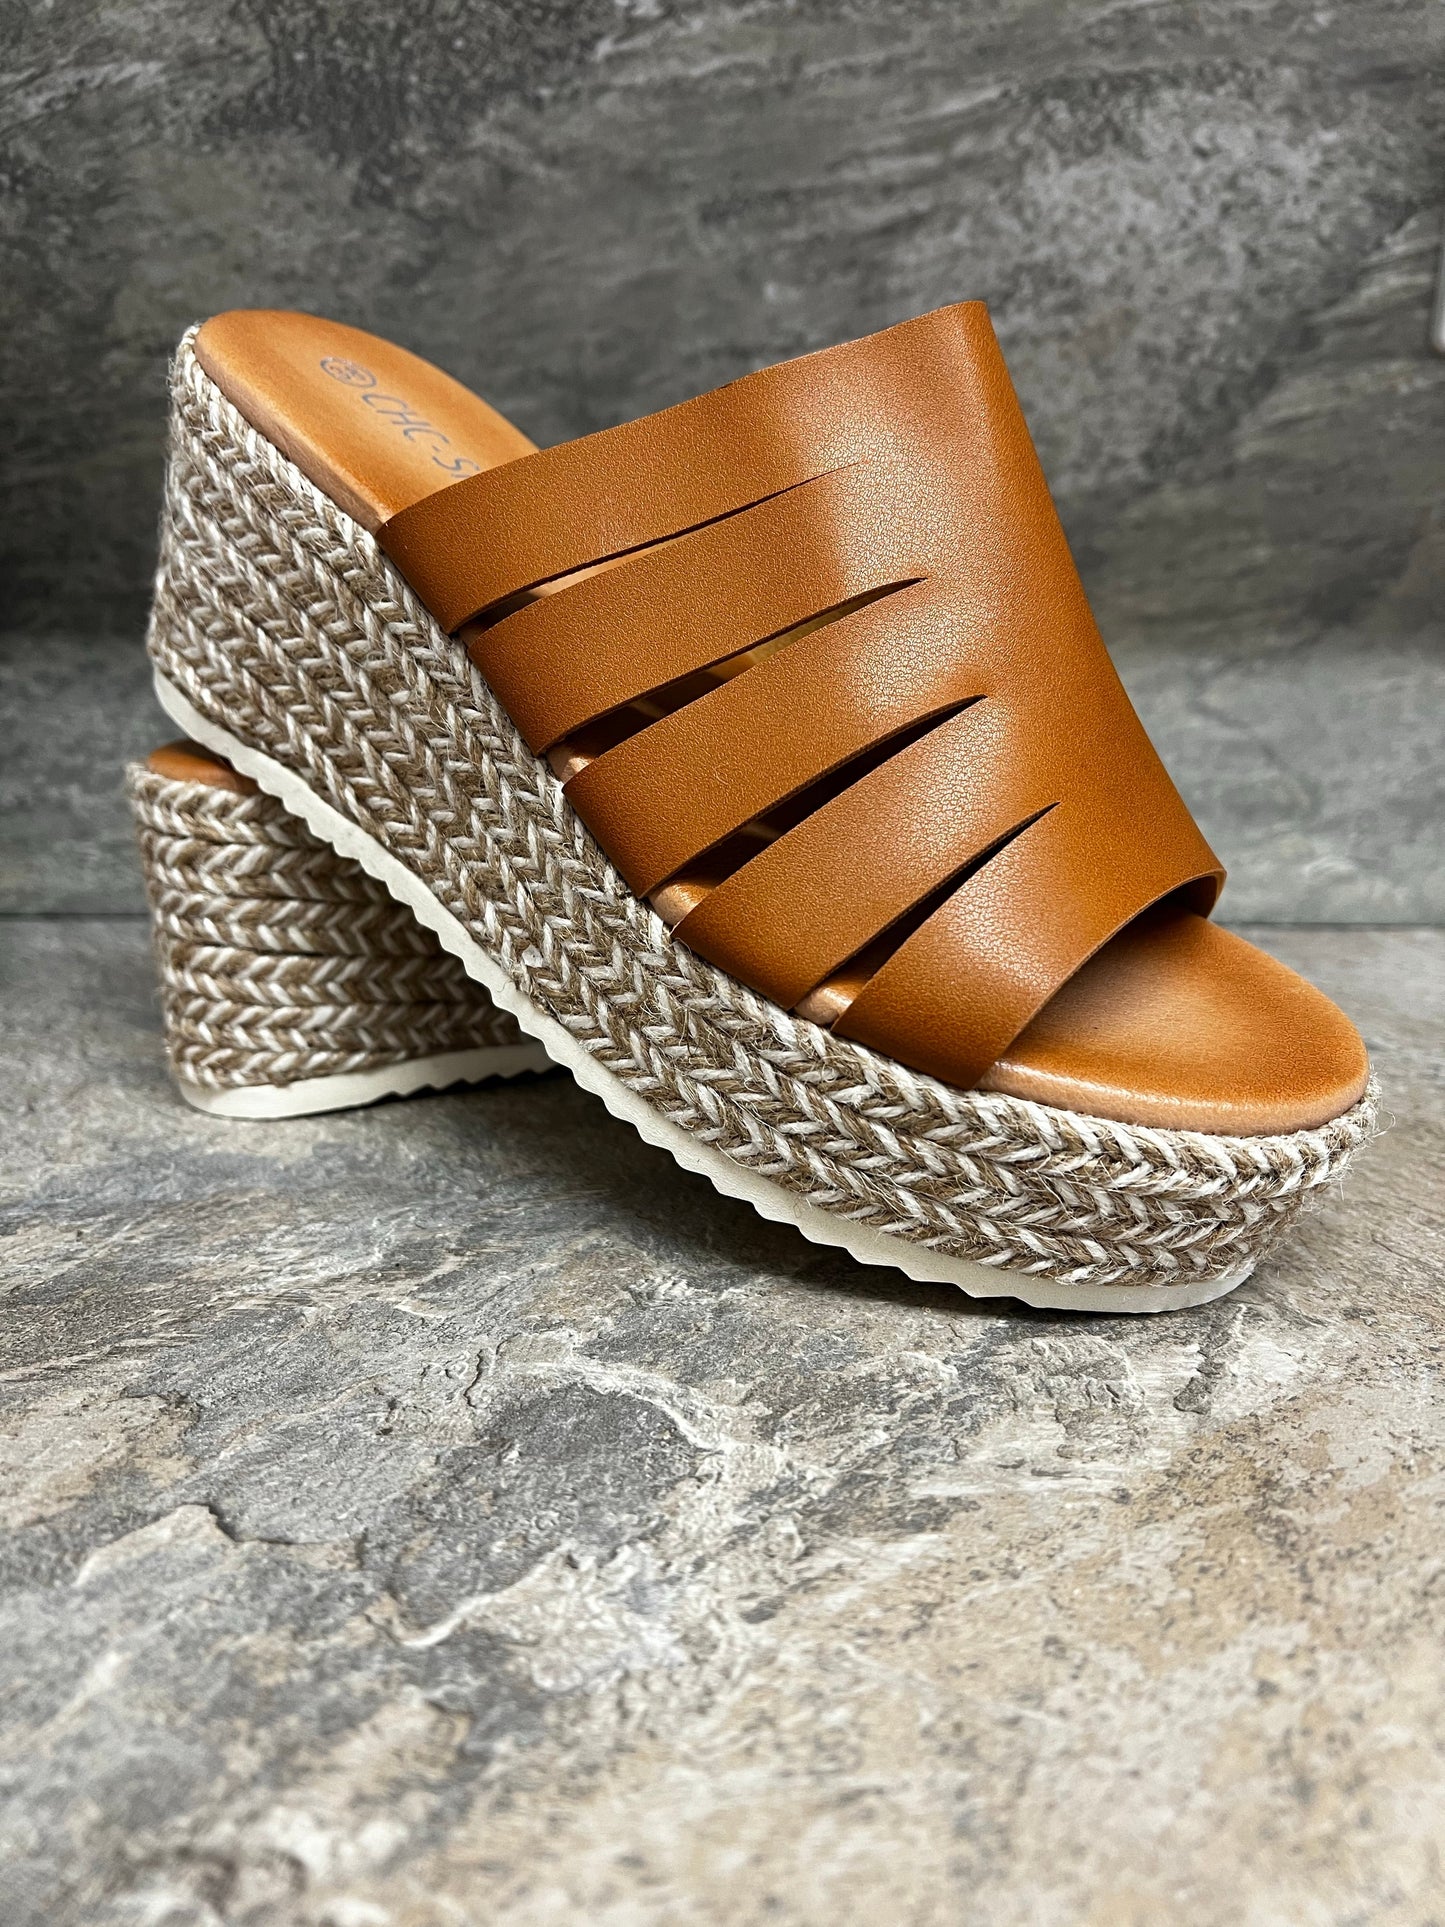 Tan mule with hessian wedge sizes 3-8